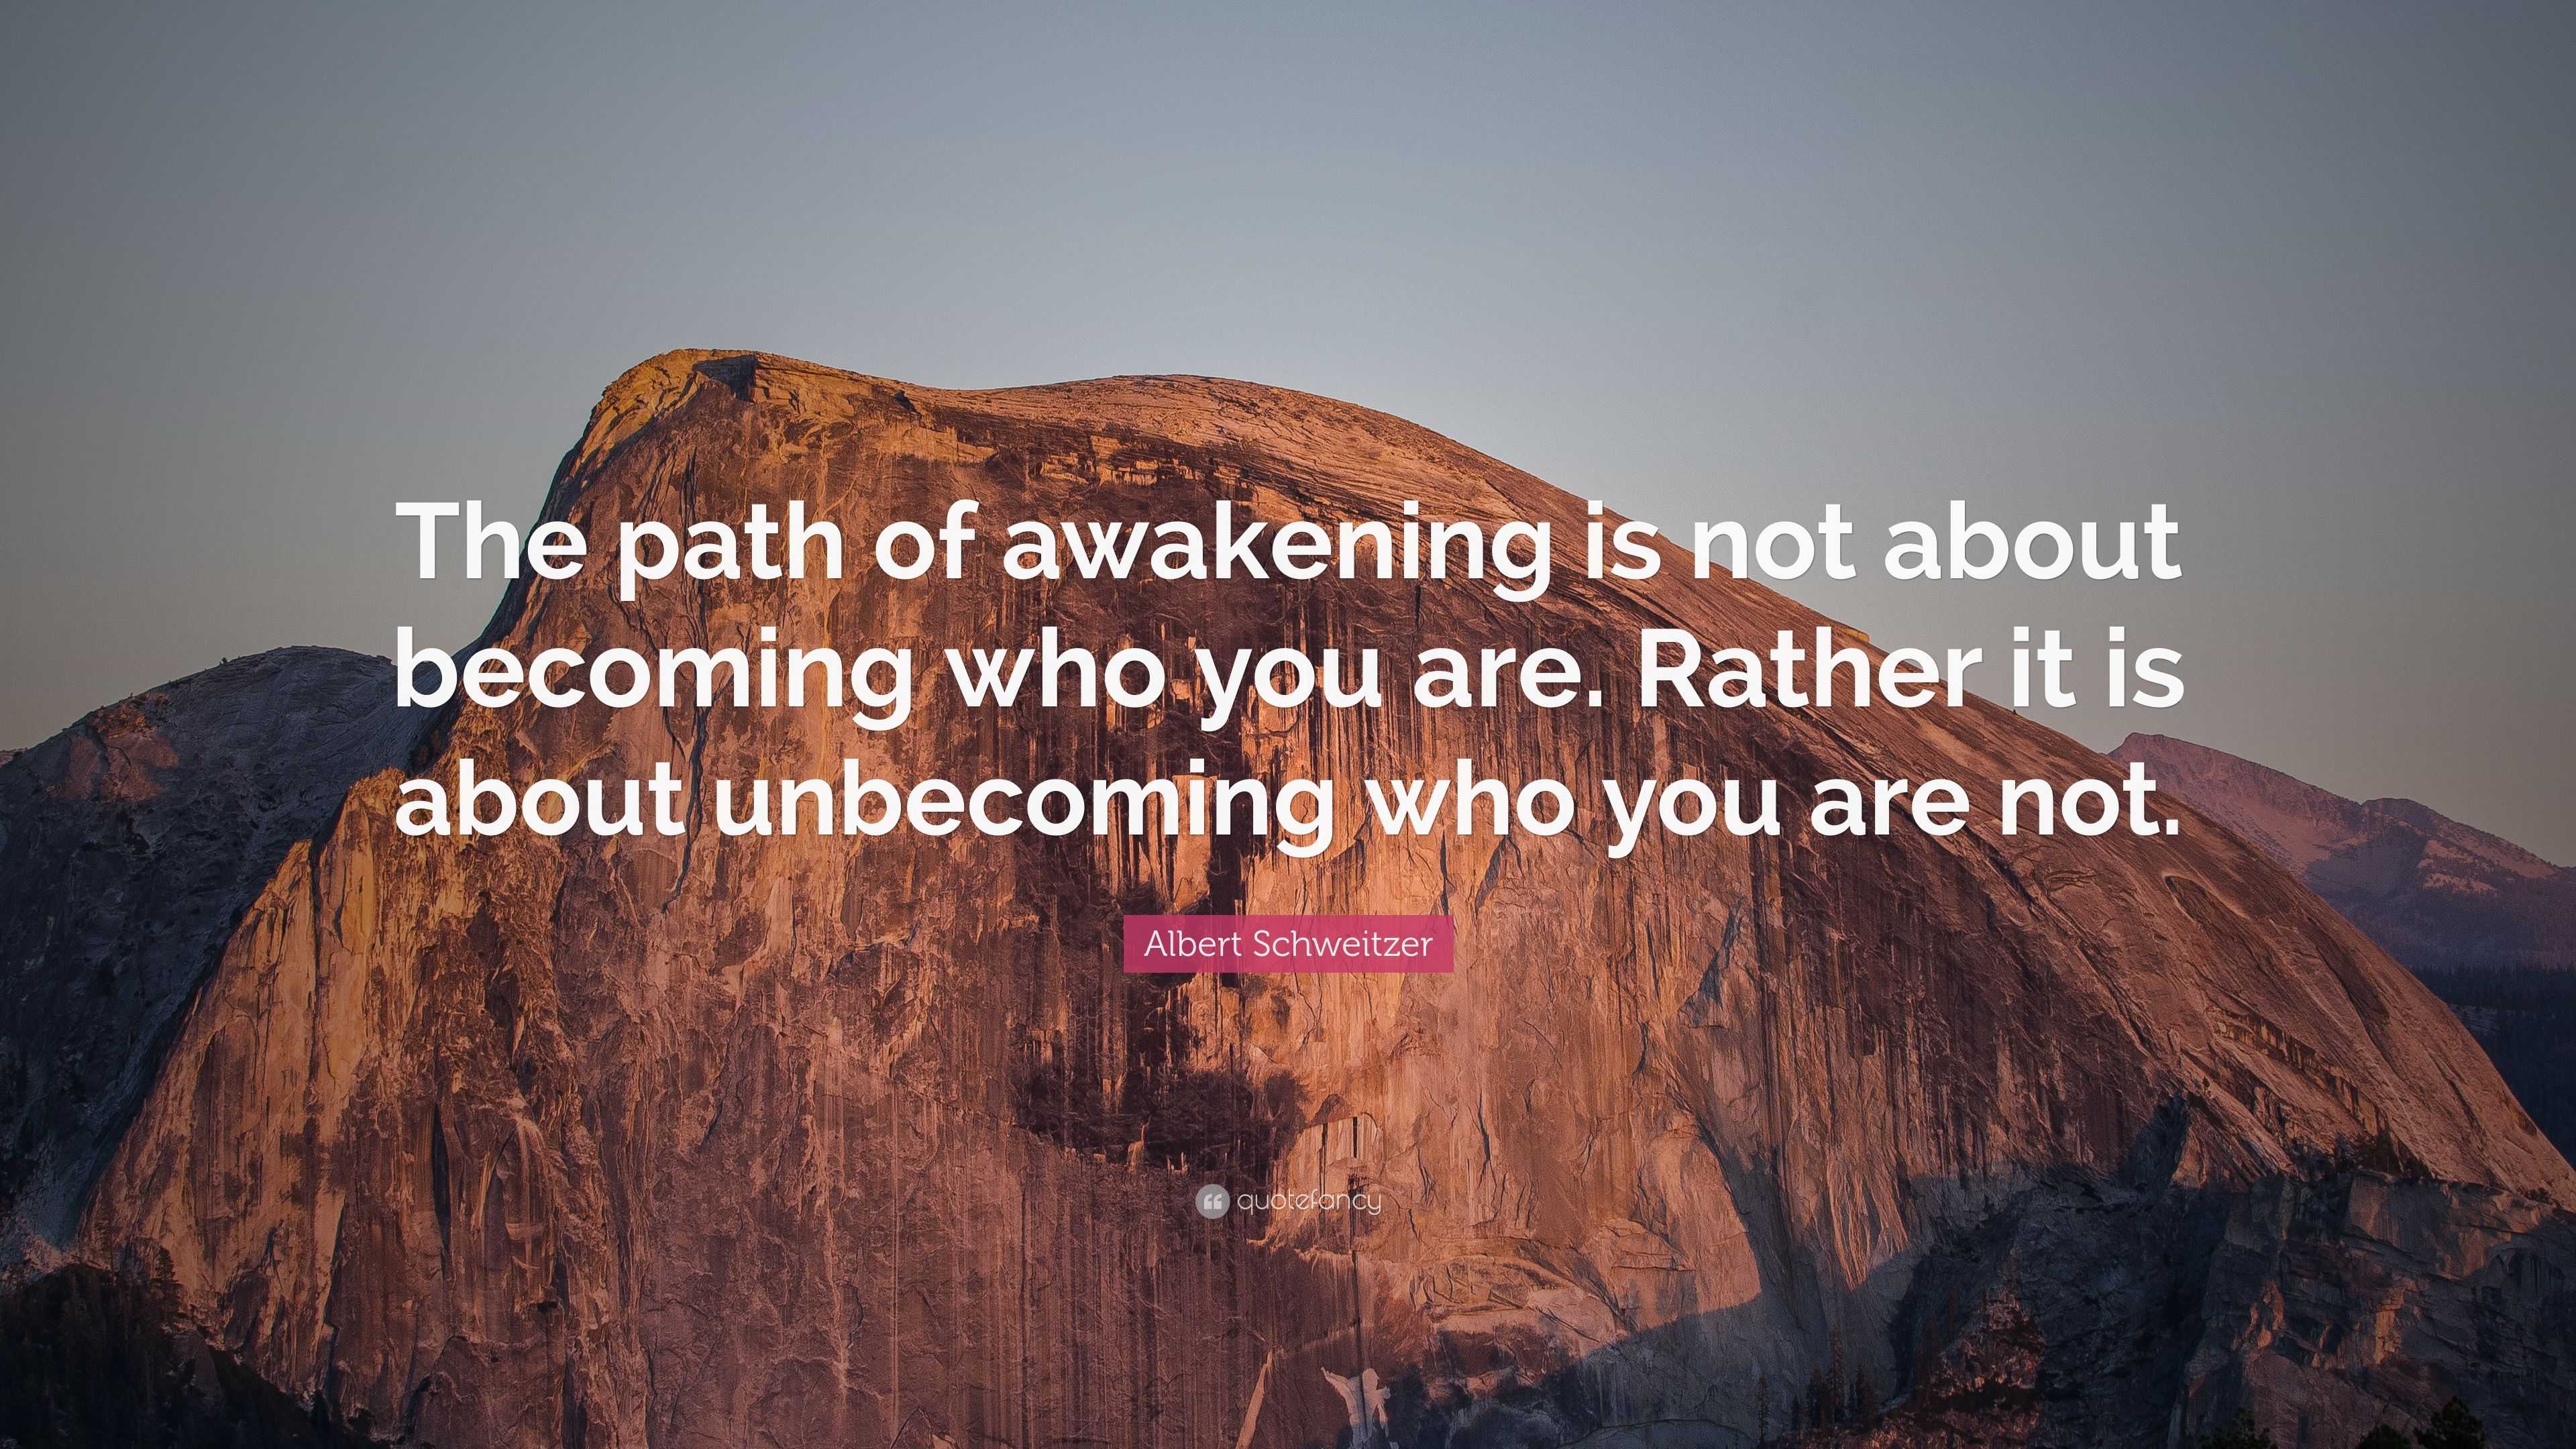 Albert Schweitzer Quote: “The path of awakening is not about becoming ...